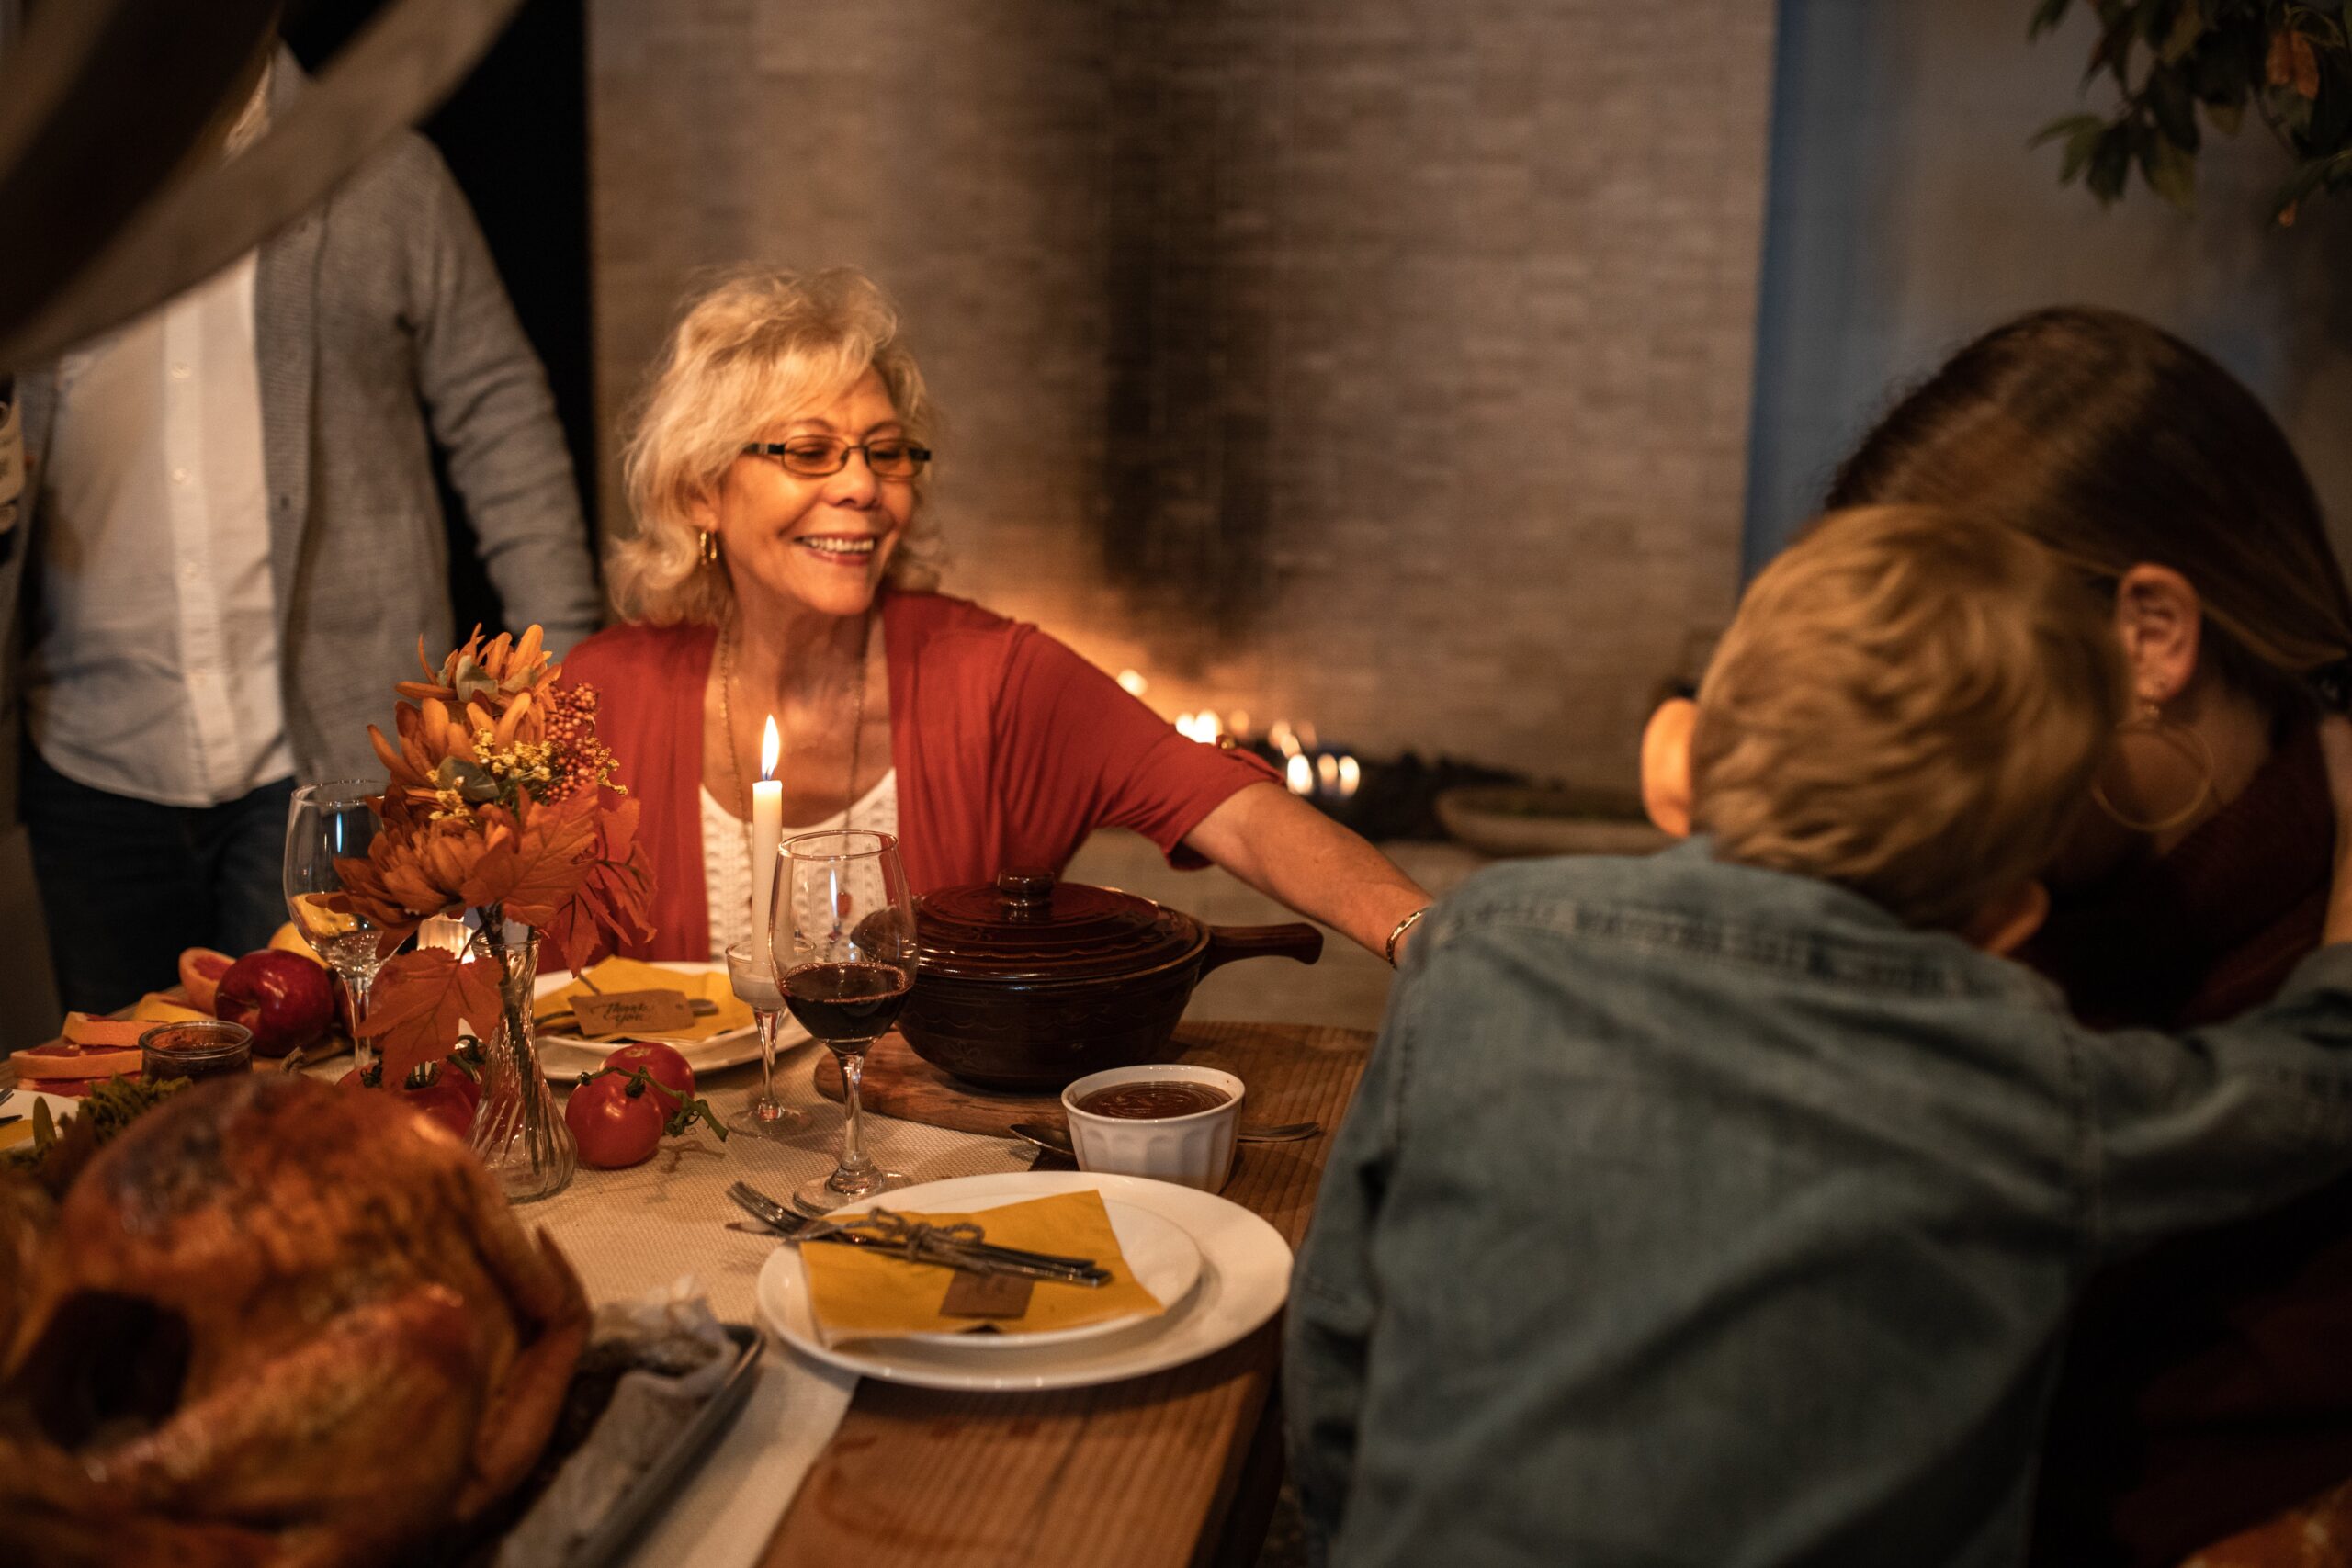 Woman smiling at the table being thankful